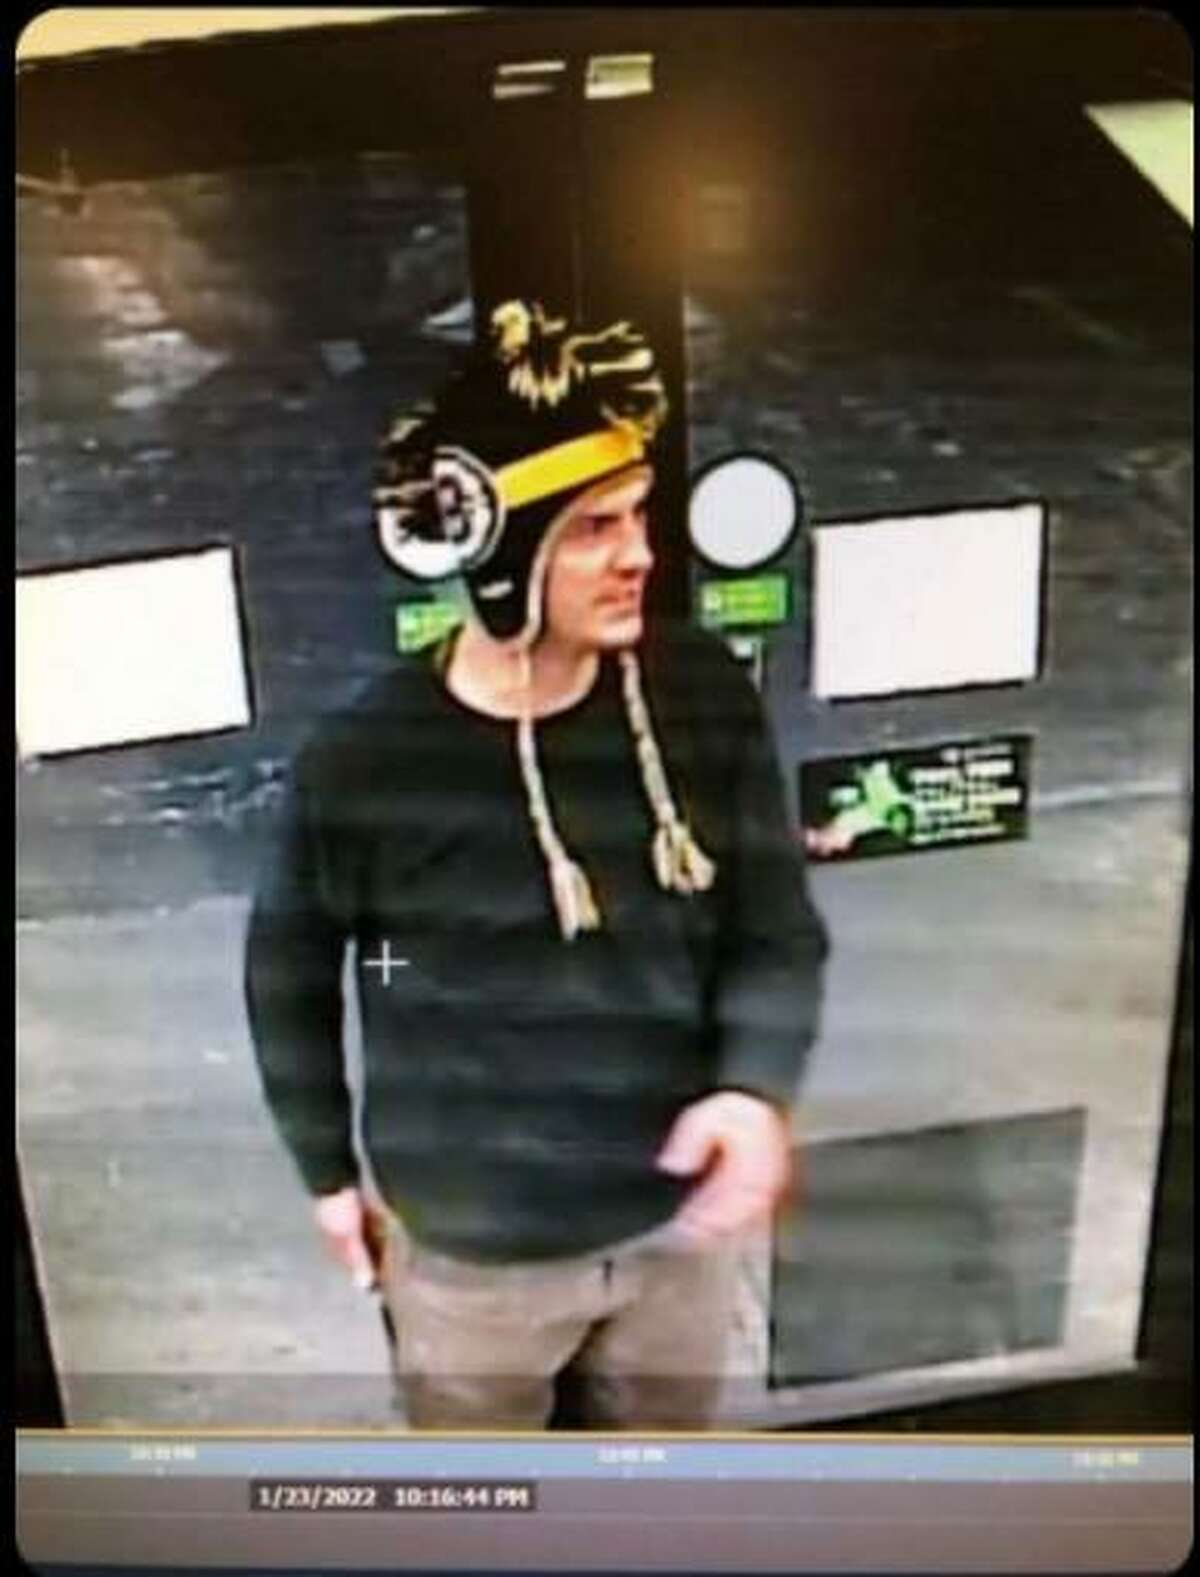 East Hampton police believe this individual may have been behind a recent theft at a volunteer fire station, and are asking for the public to help identify him.